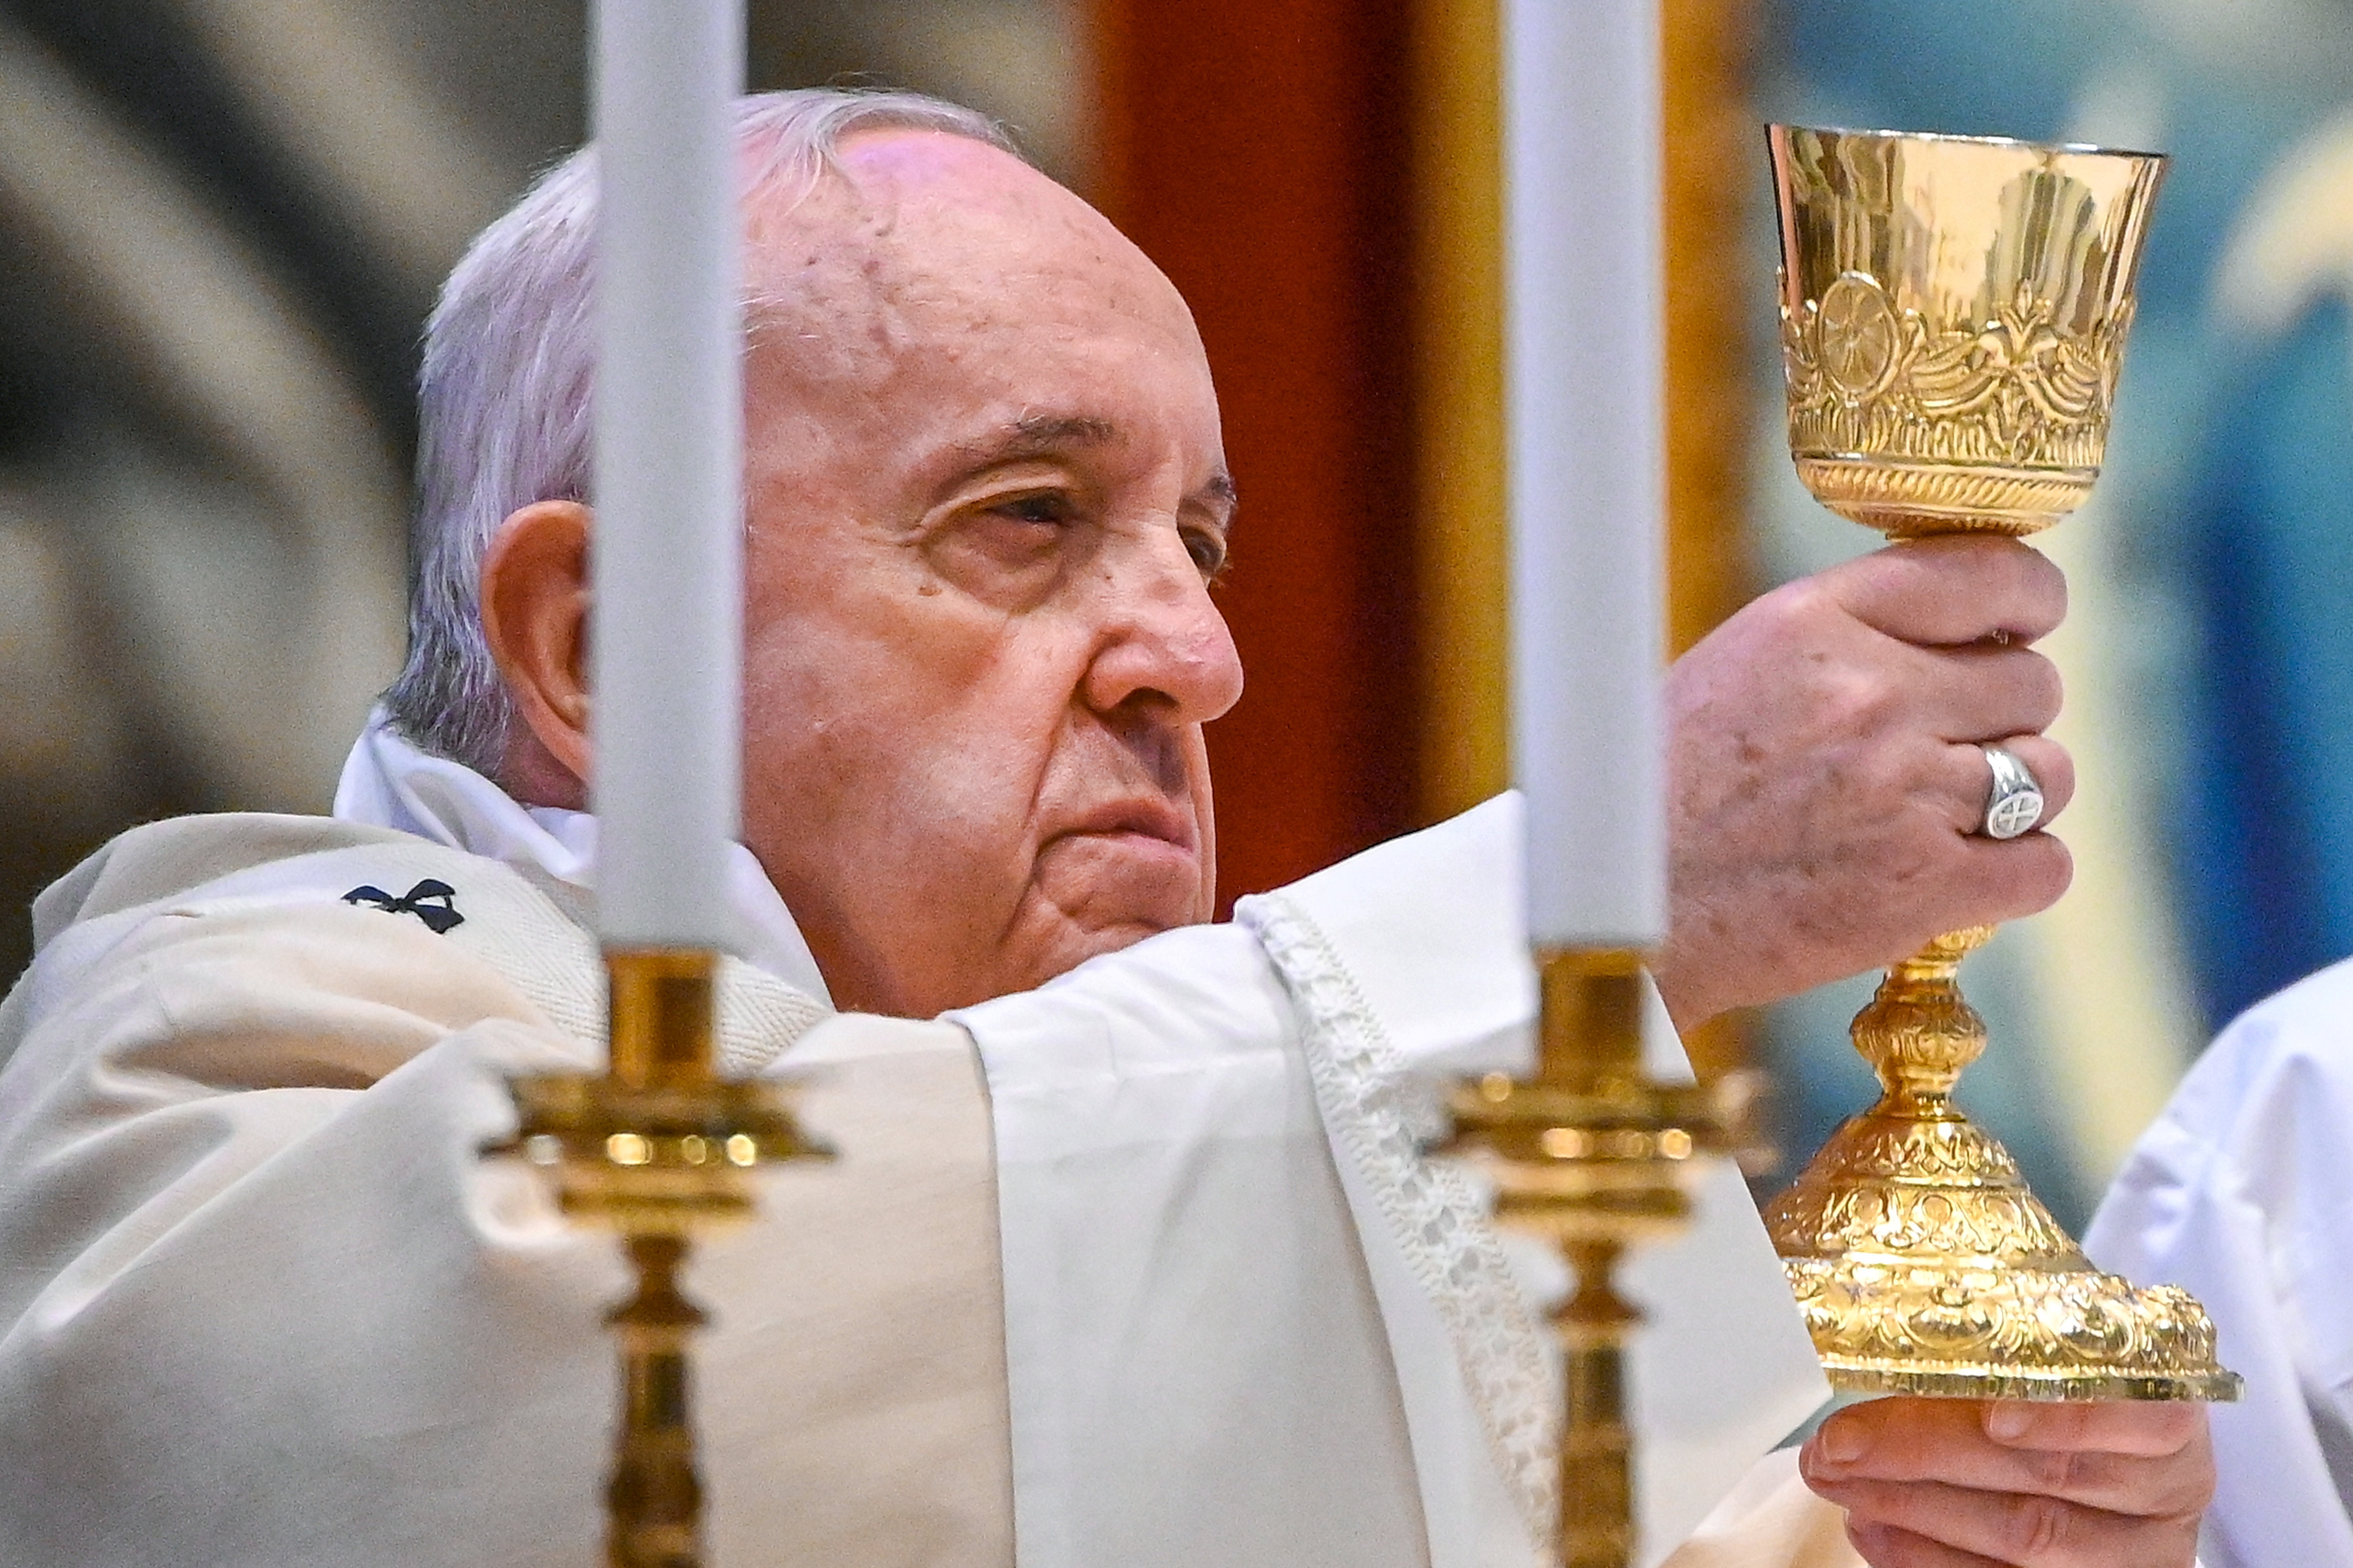 Pope Francis holds the chalice as he celebrates the Eucharist during Mass as part of World Youth Day, at St. Peter's Basilica, at the Vatican, November 22, 2020